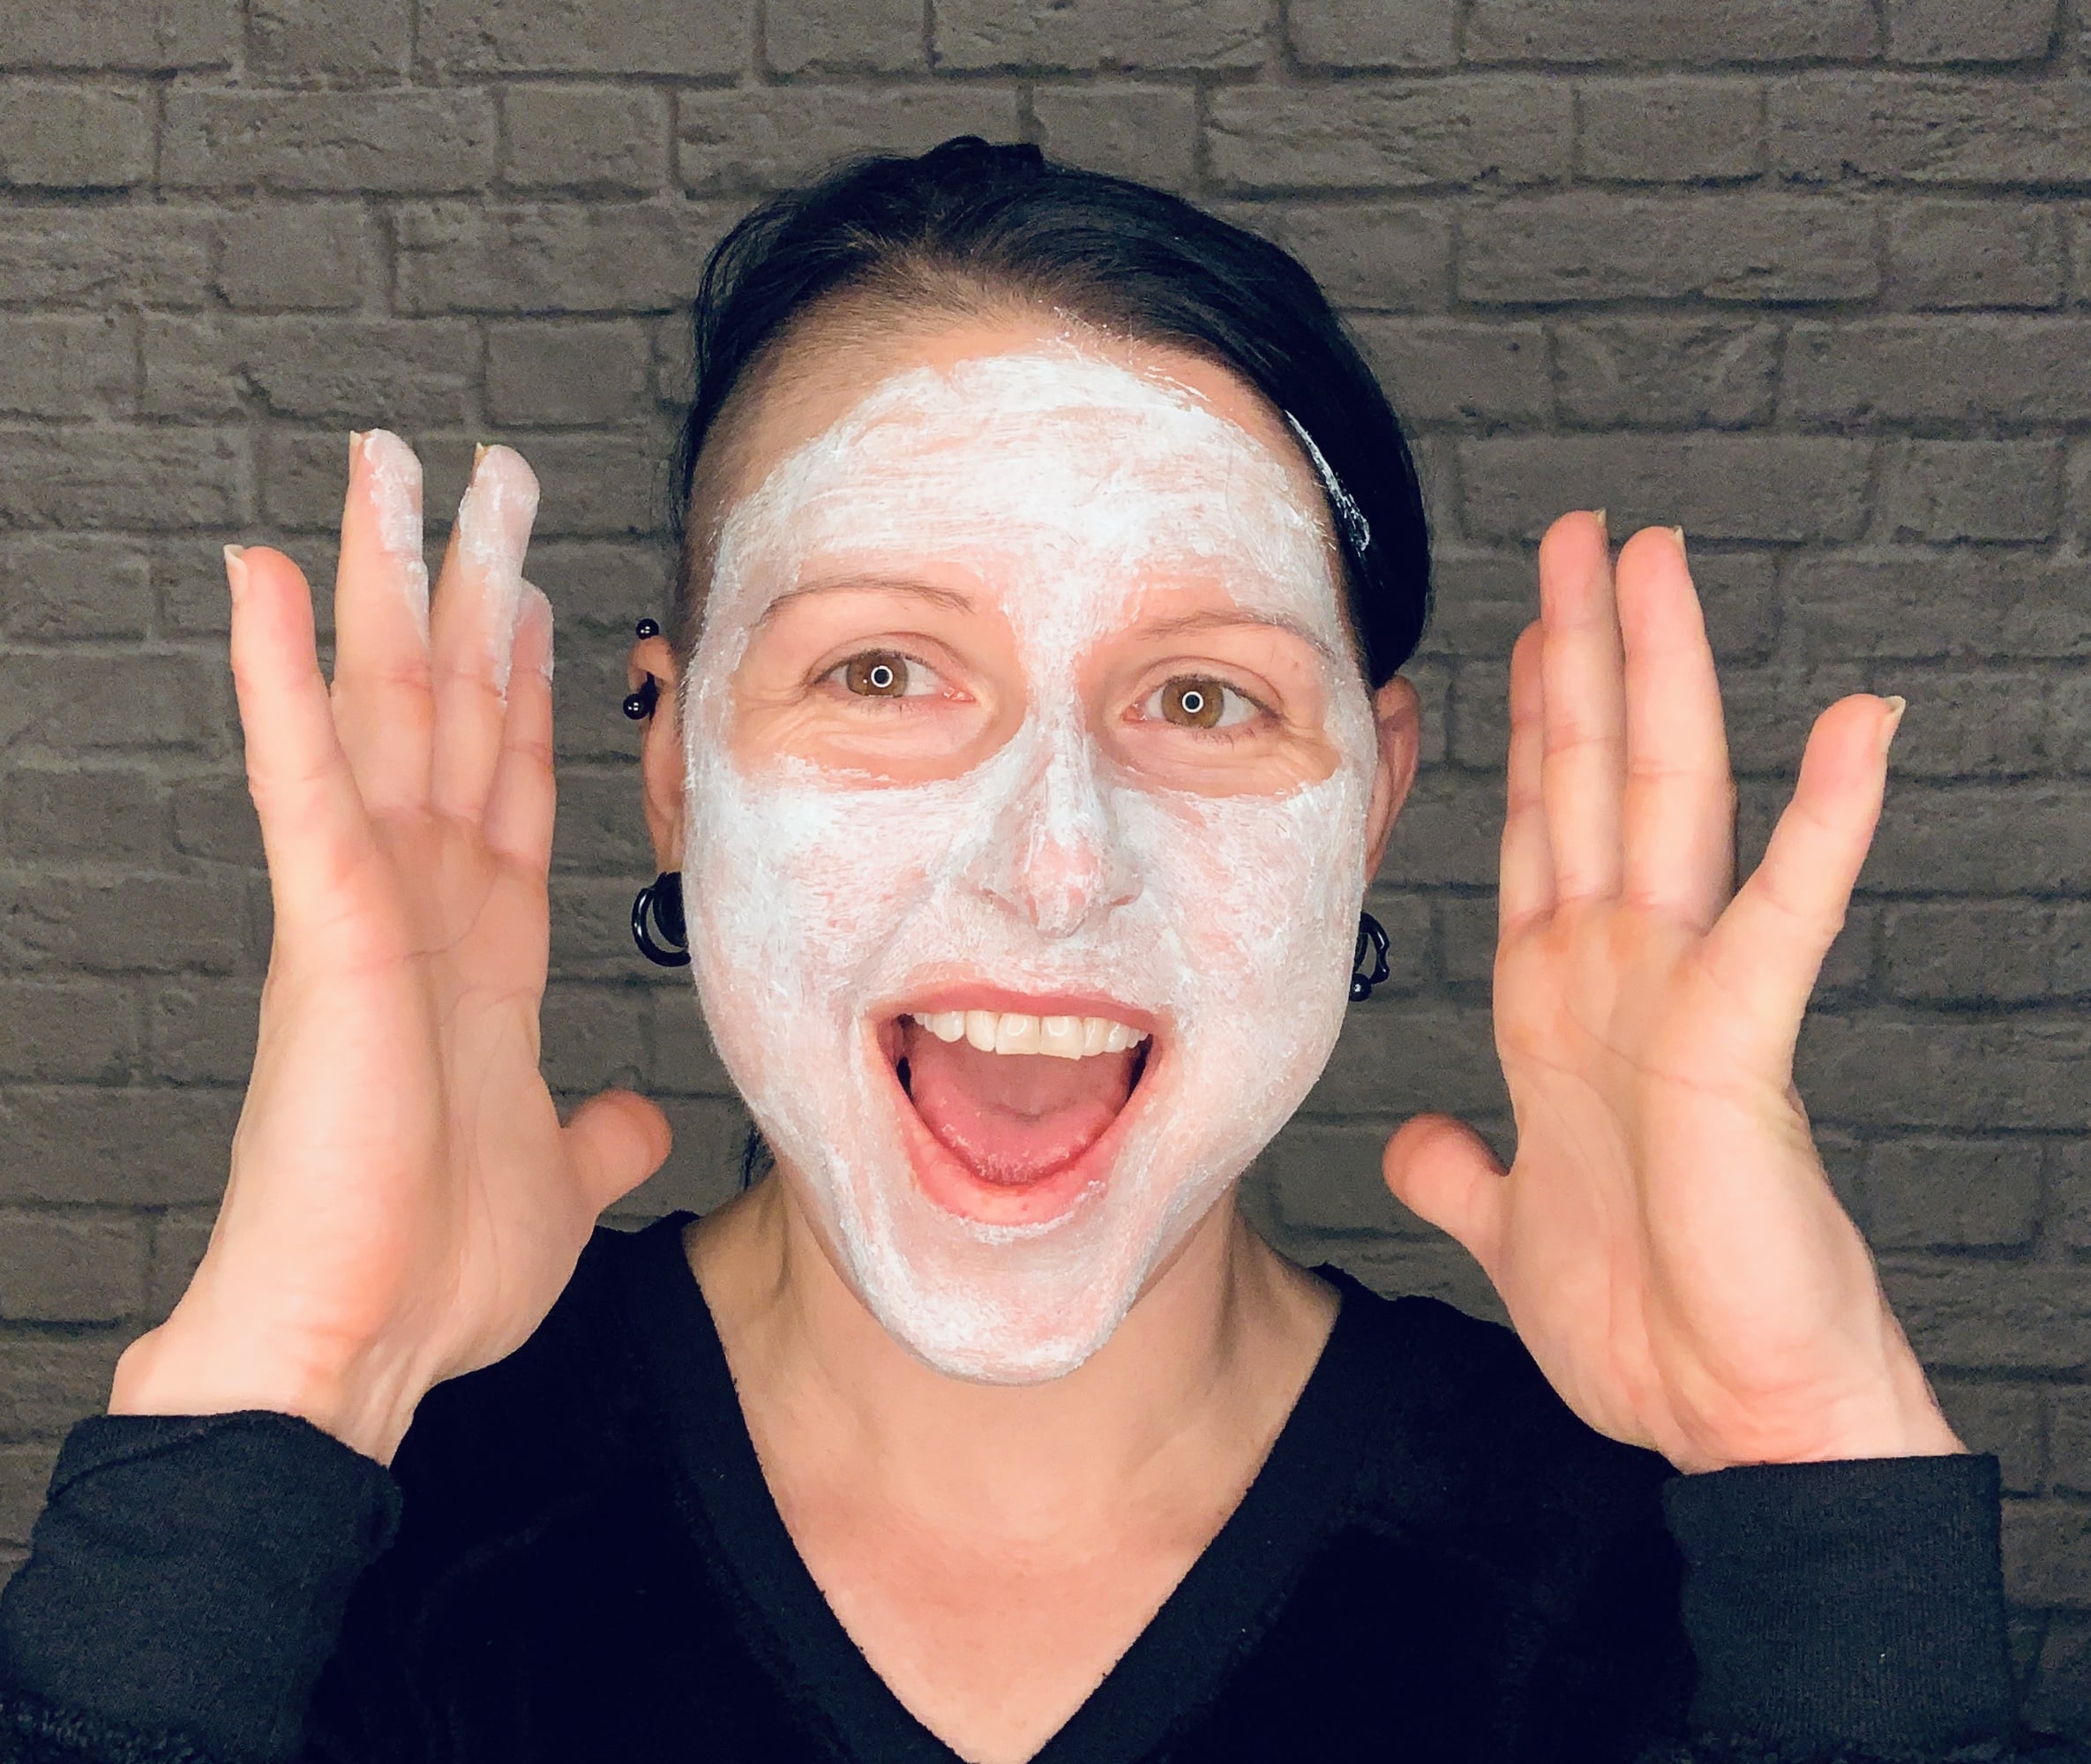 Adrienne Harvey of GiryaGirl trying the Fré Skincare Detox Me Post-workout mask